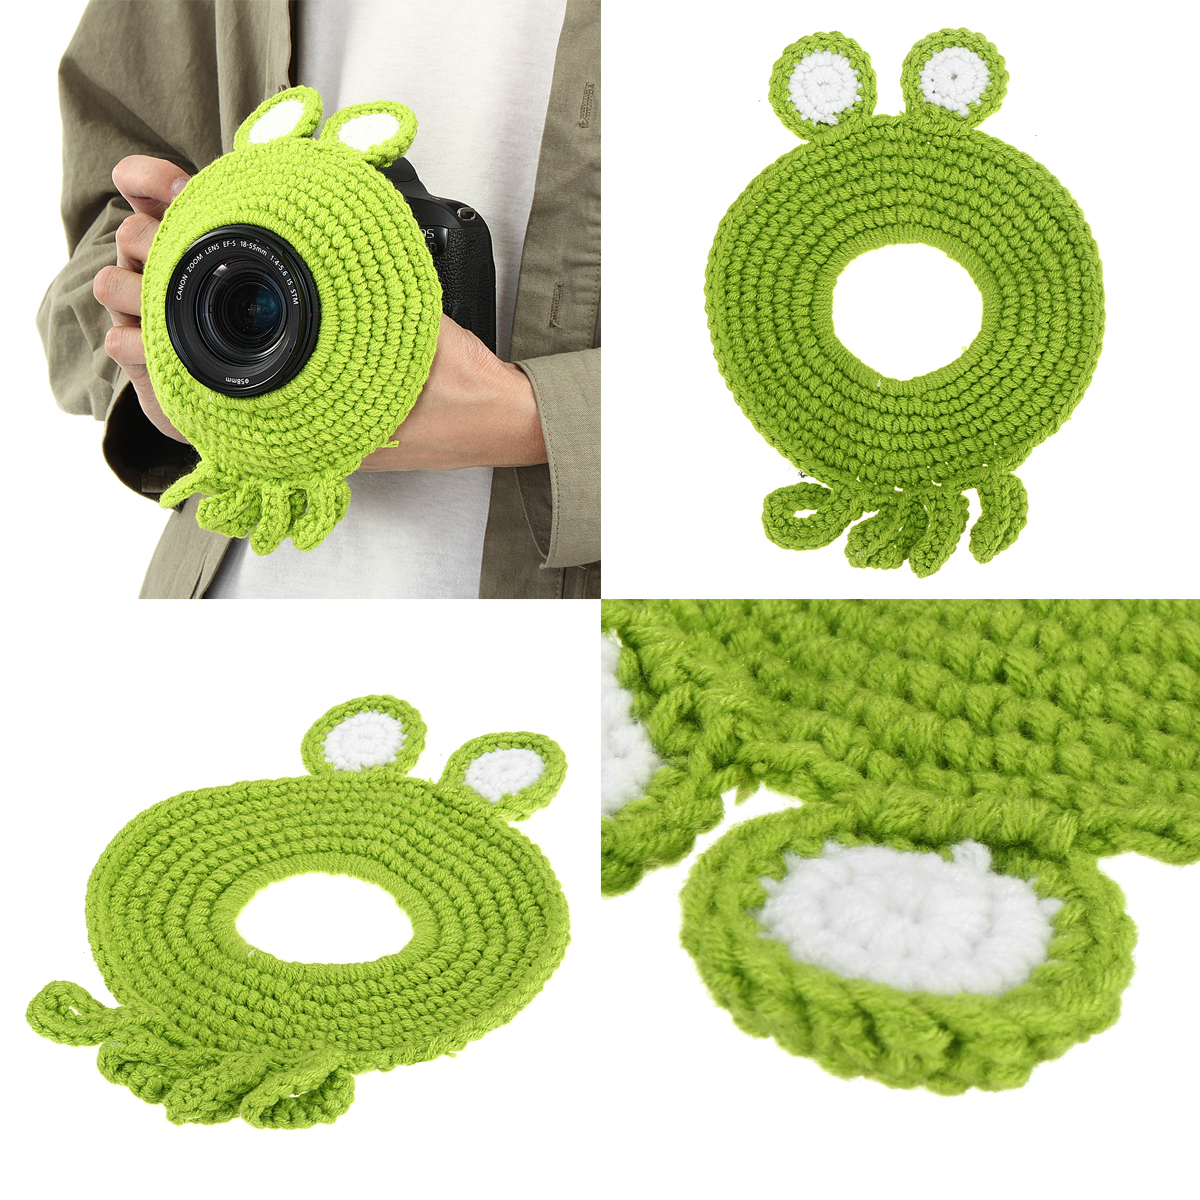 Hand-knitted-Wool-Decor-Case-For-Camera-Lens-Decorative-Photo-Guide-Doll-Toys-For-Kids-1457648-6